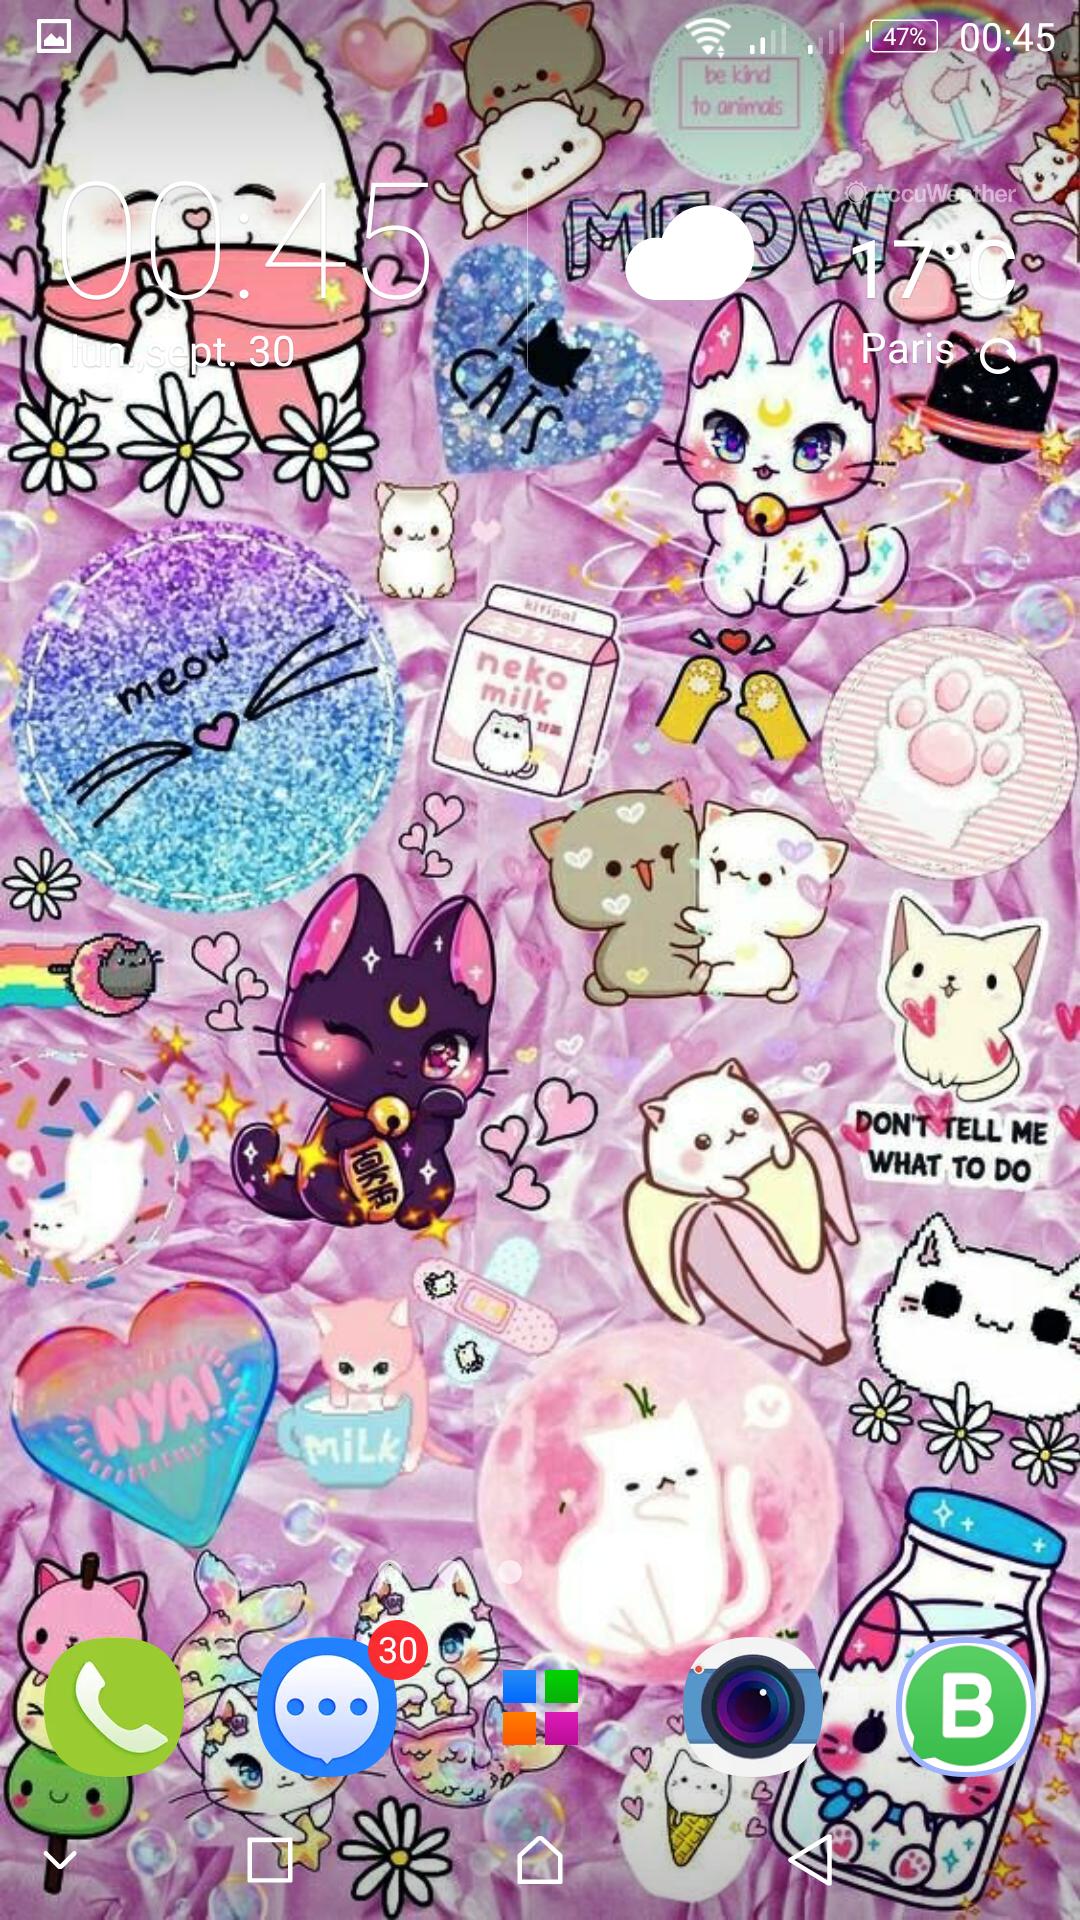 Cute Girly Wallpapers For Teenagers / Girls love shiny, floral and cute